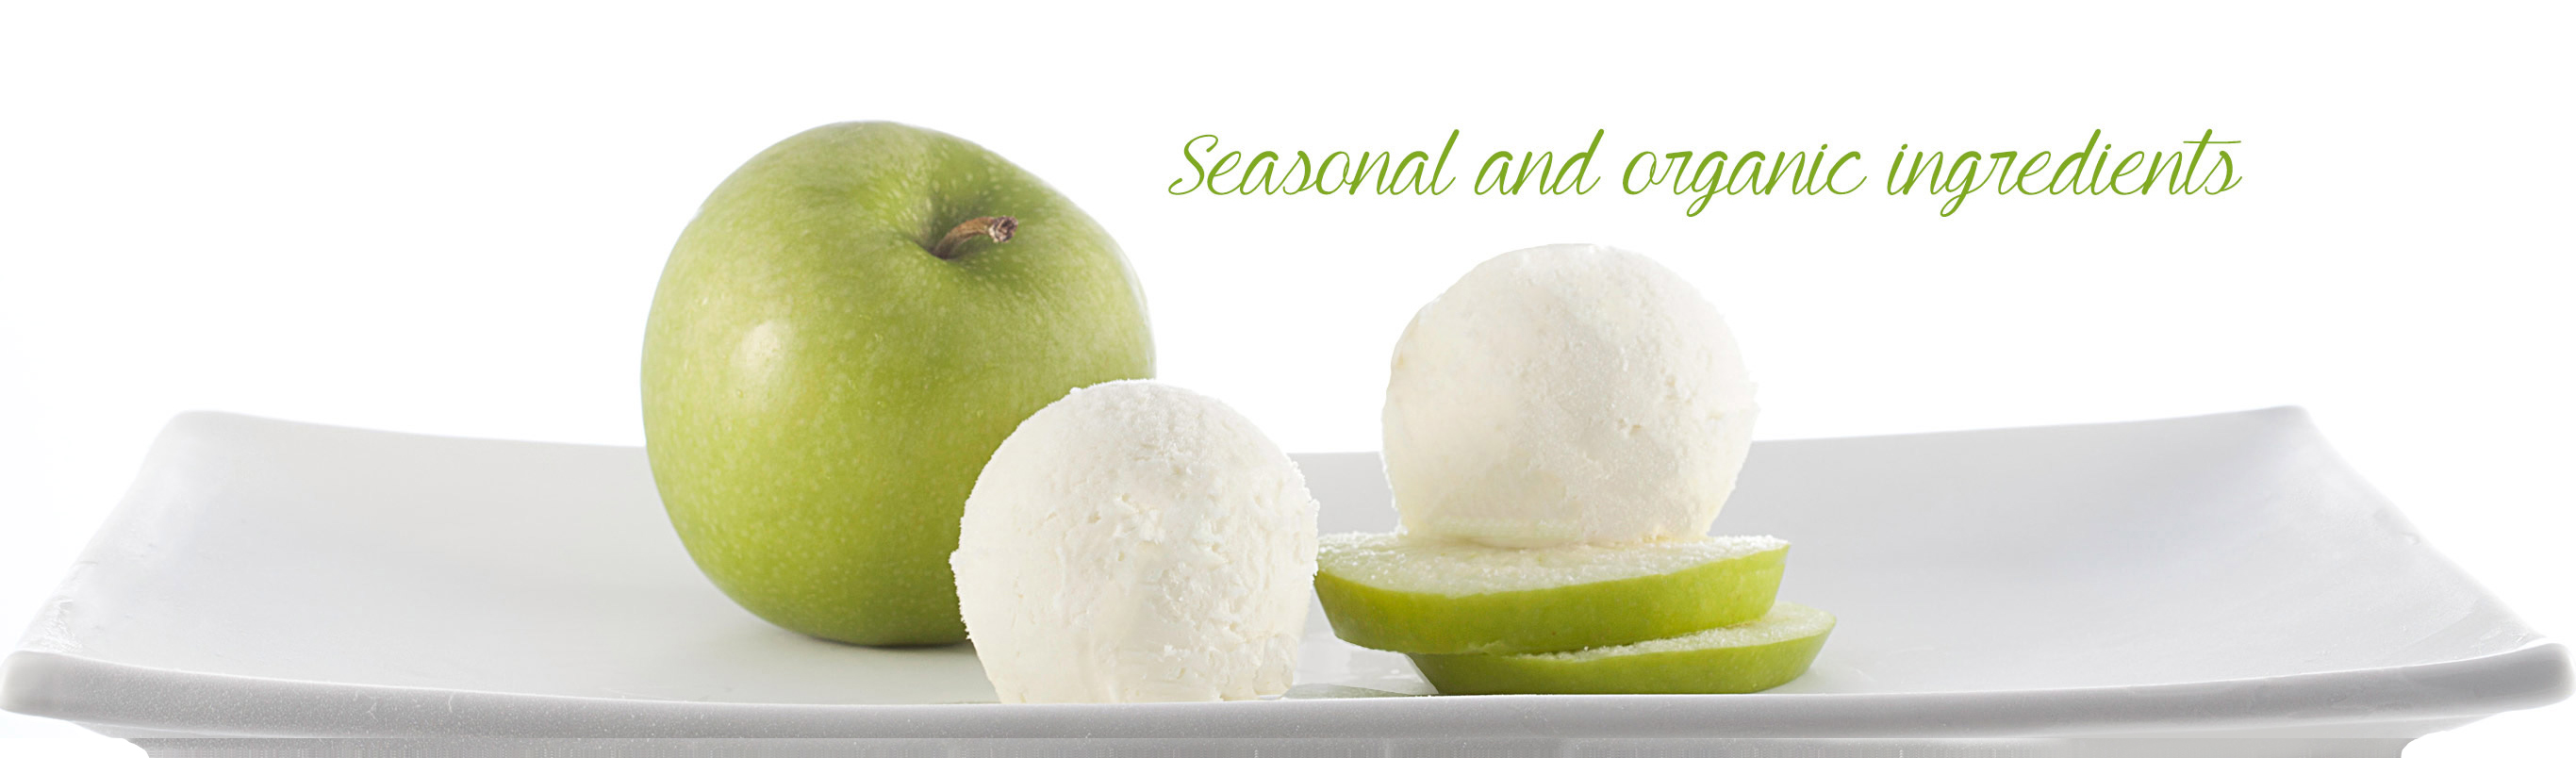 green apples and sorbetto with text: seasonal and organic ingredients